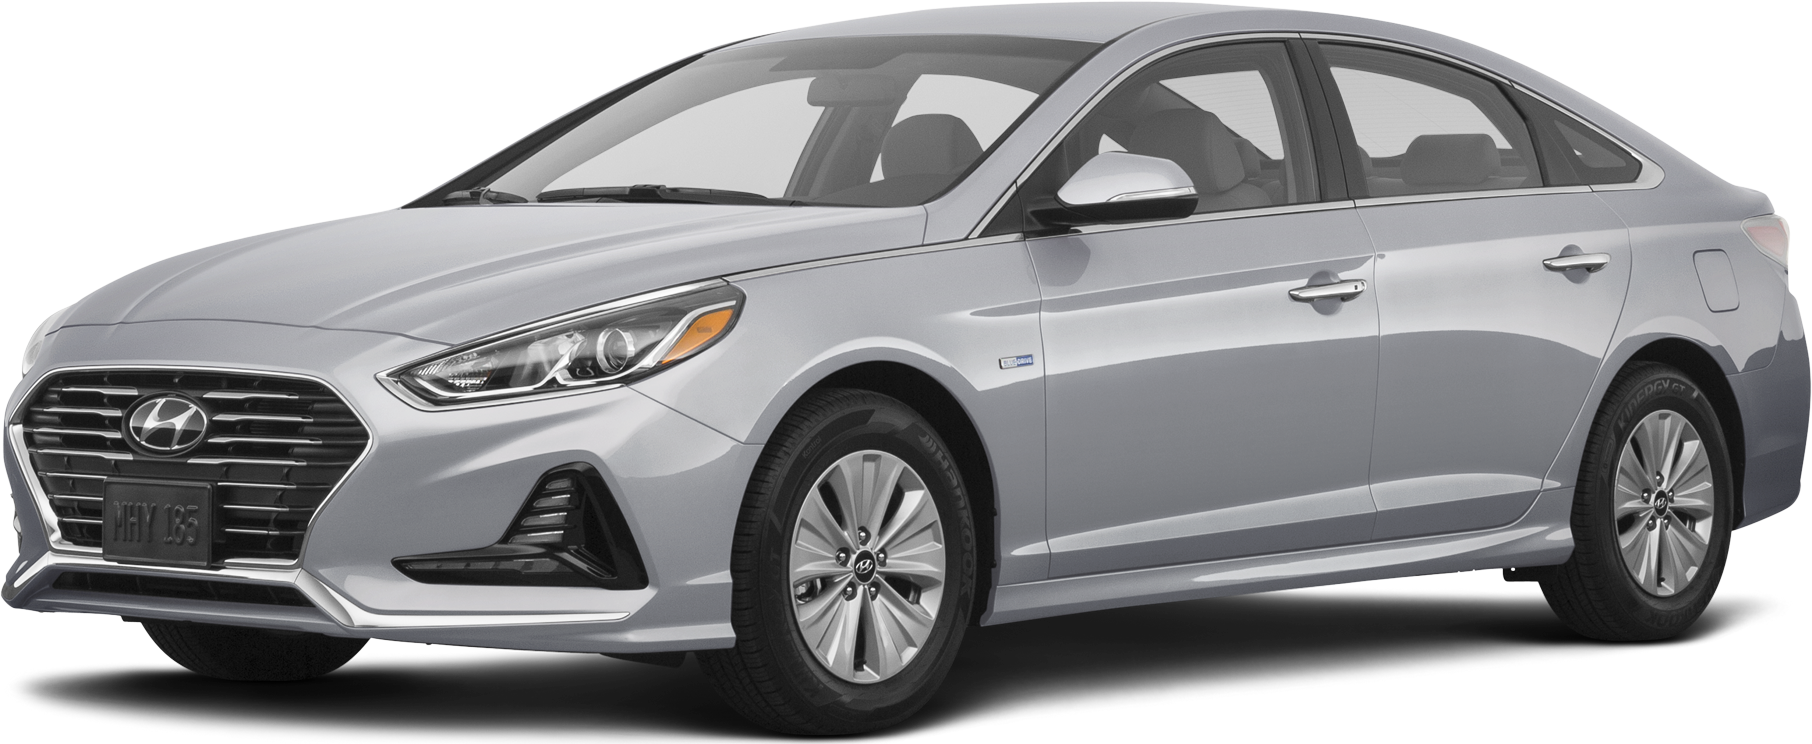 Hyundai Accent: 2019 Motor Trend Car of the Year Contender